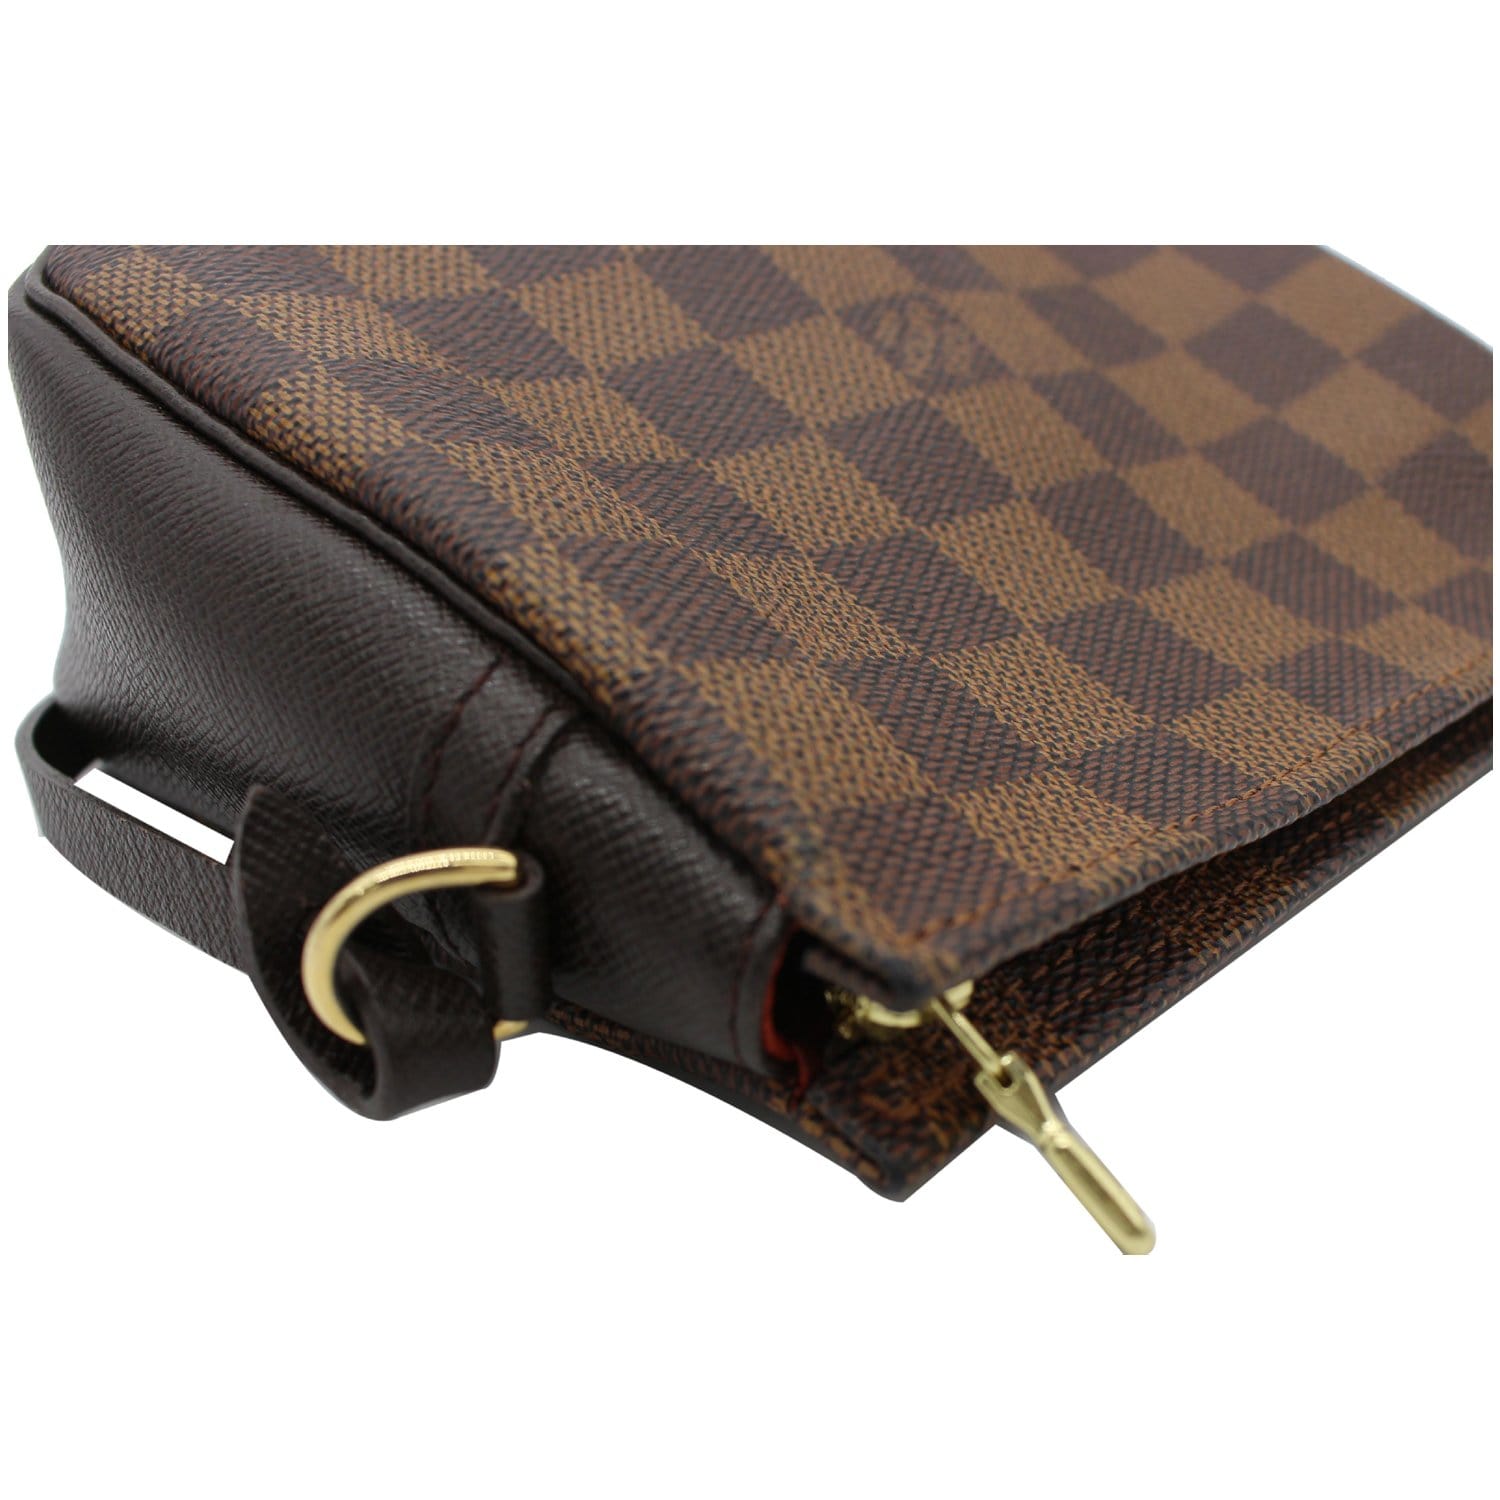 Shop for Louis Vuitton Damier Ebene Canvas Leather Trousse Pochette Bag -  Shipped from USA